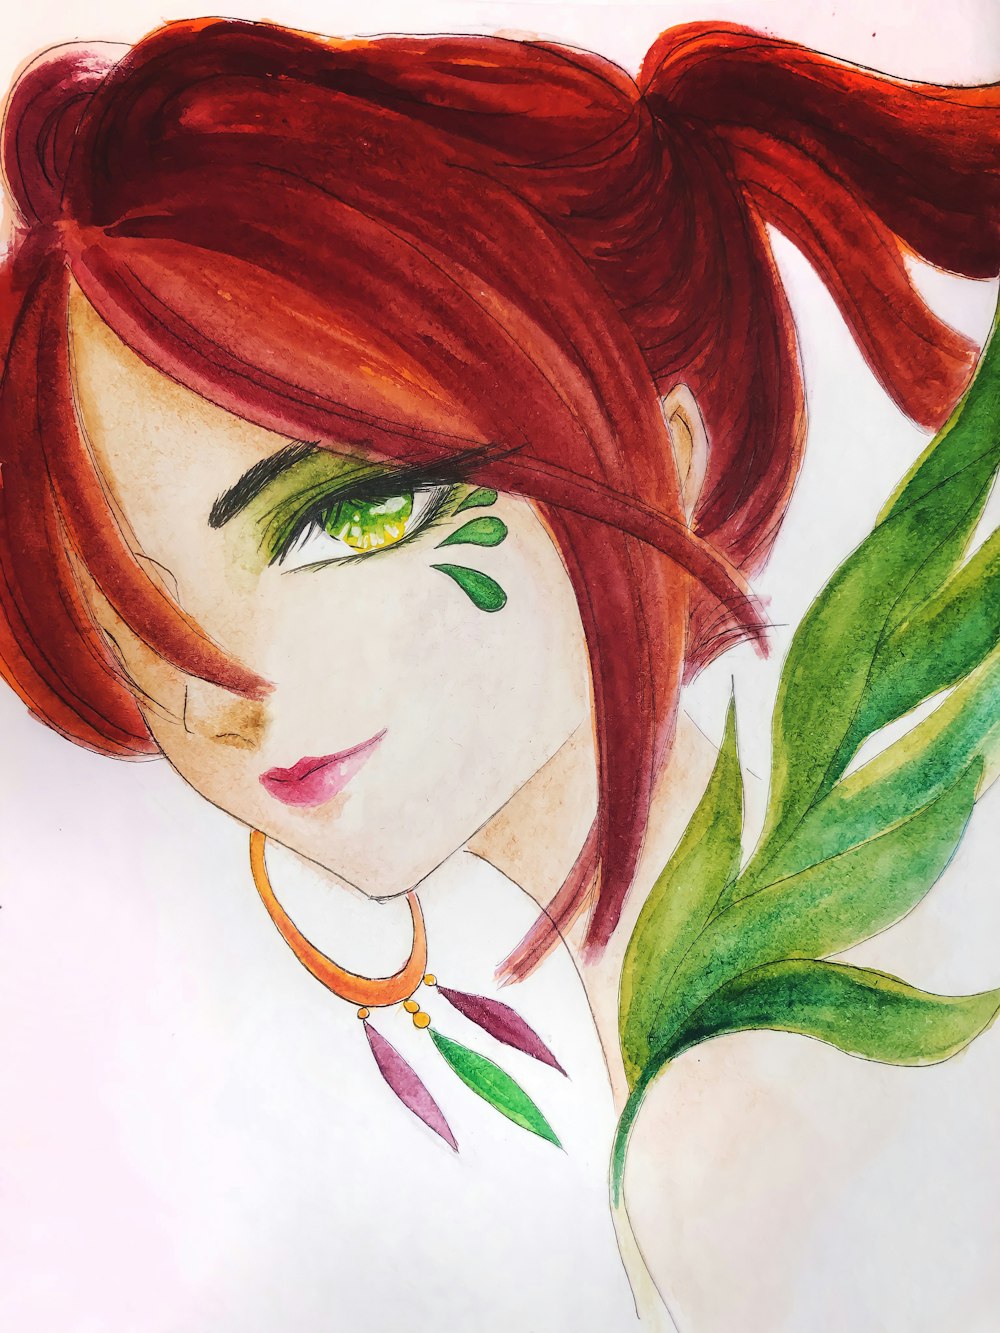 a drawing of a woman with red hair and green eyes